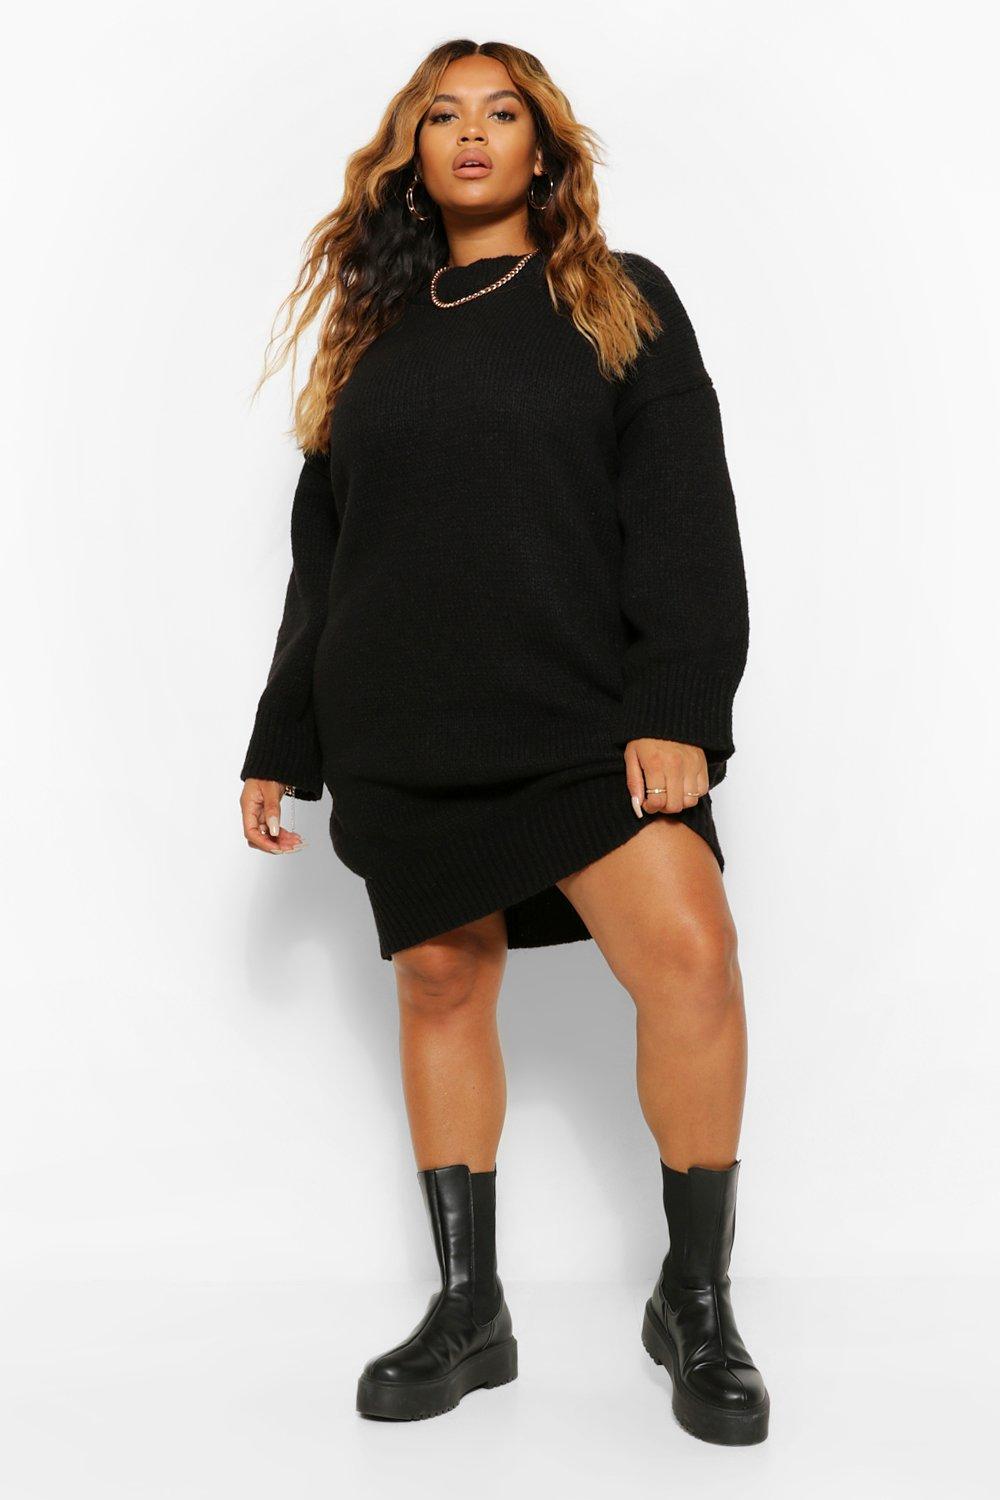 Women's Plus Oversized Slouchy Knitted ...